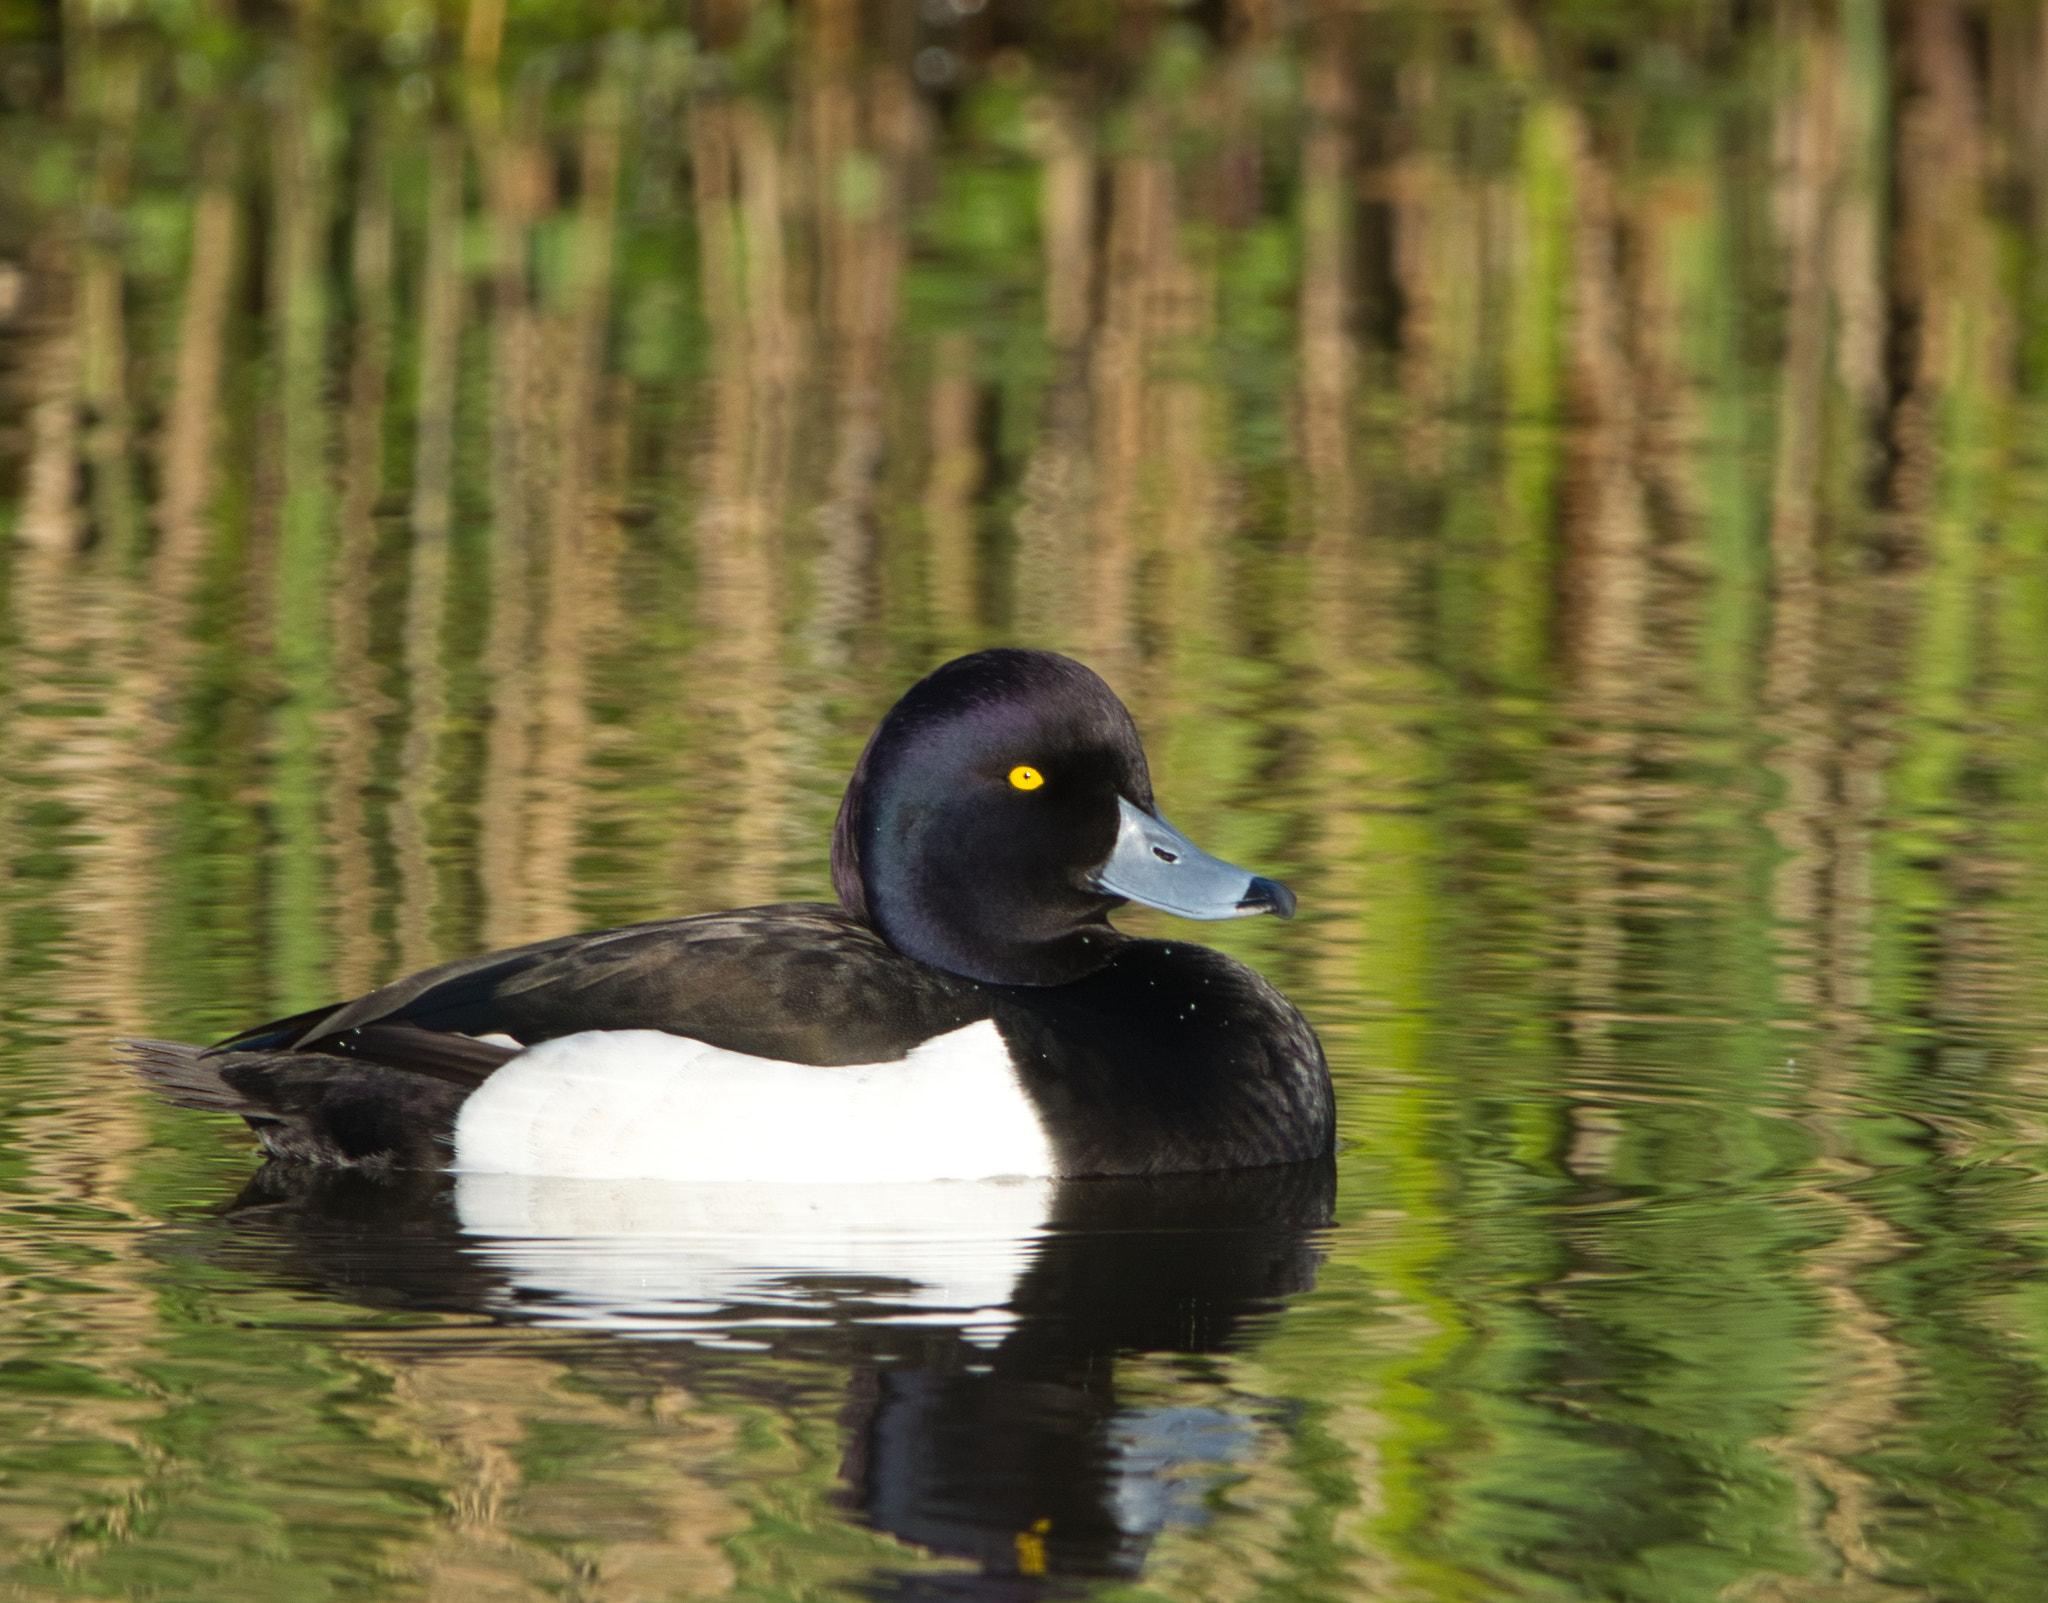 Nikon D7100 + Sigma 150-600mm F5-6.3 DG OS HSM | C sample photo. Tufted duck in the wet photography